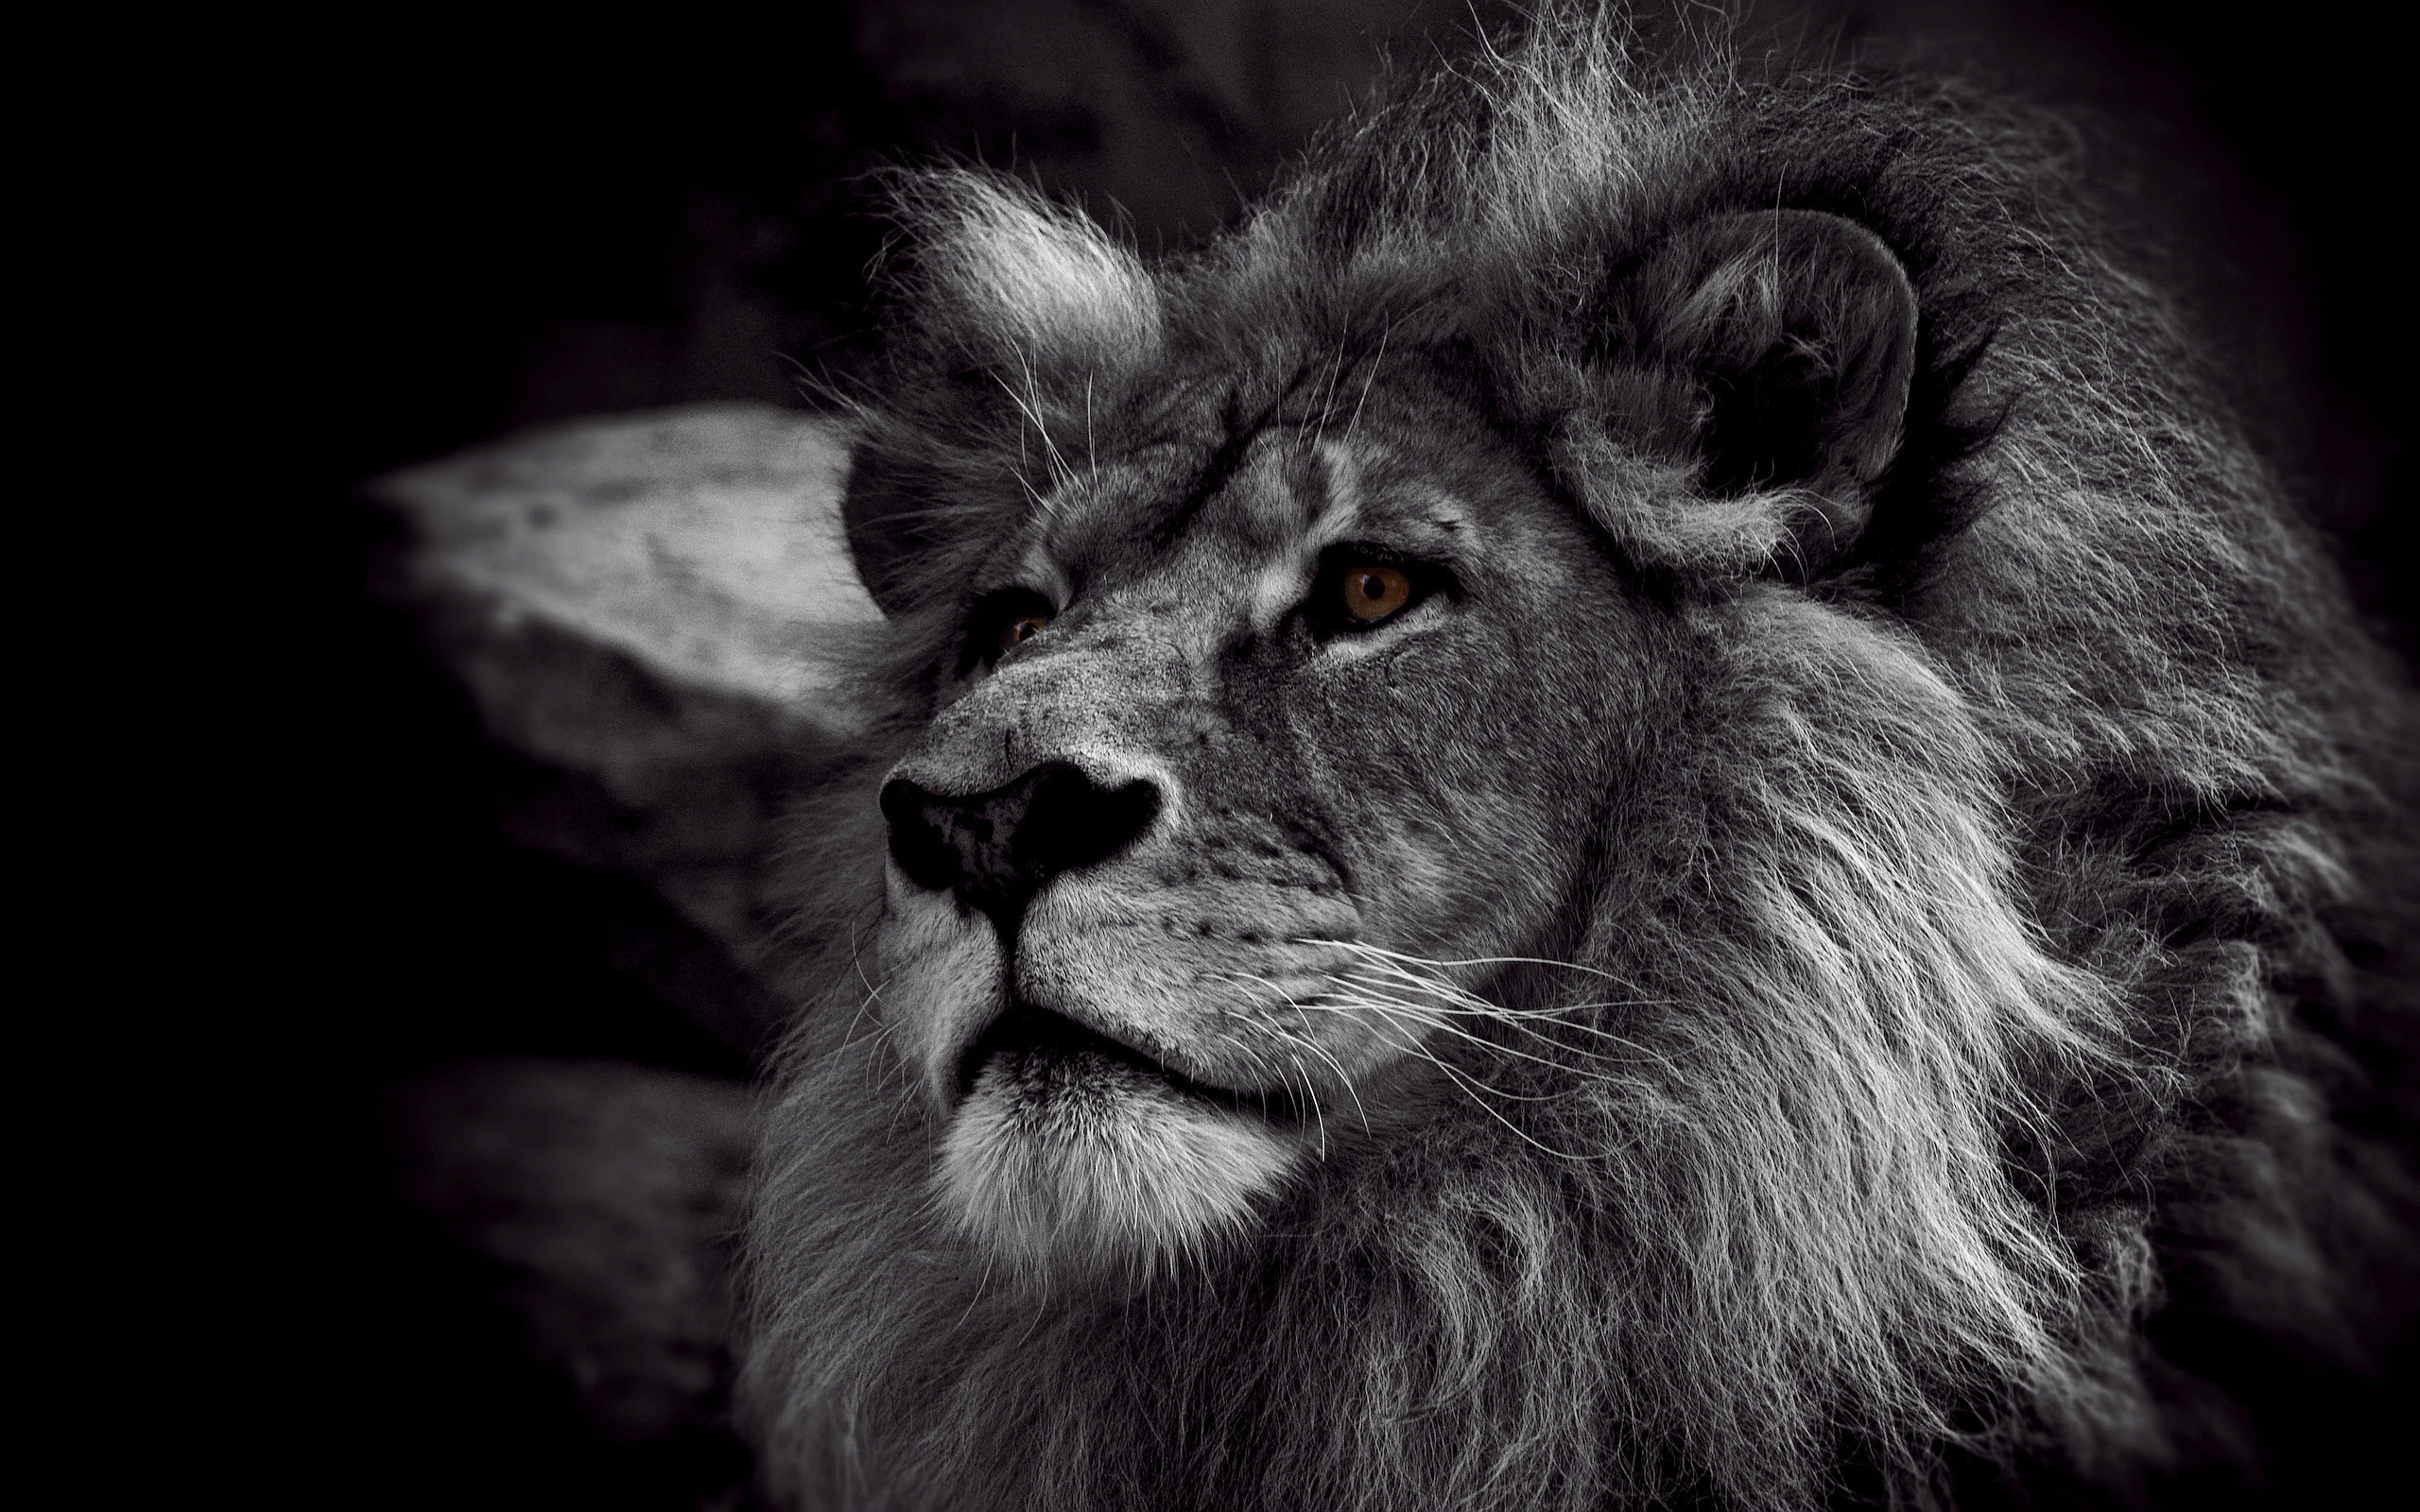 2560x1600 Lion Black And White Wallpapers High Resolution For Desktop Wallpaper 2560  x 1600 px 1.2 MB